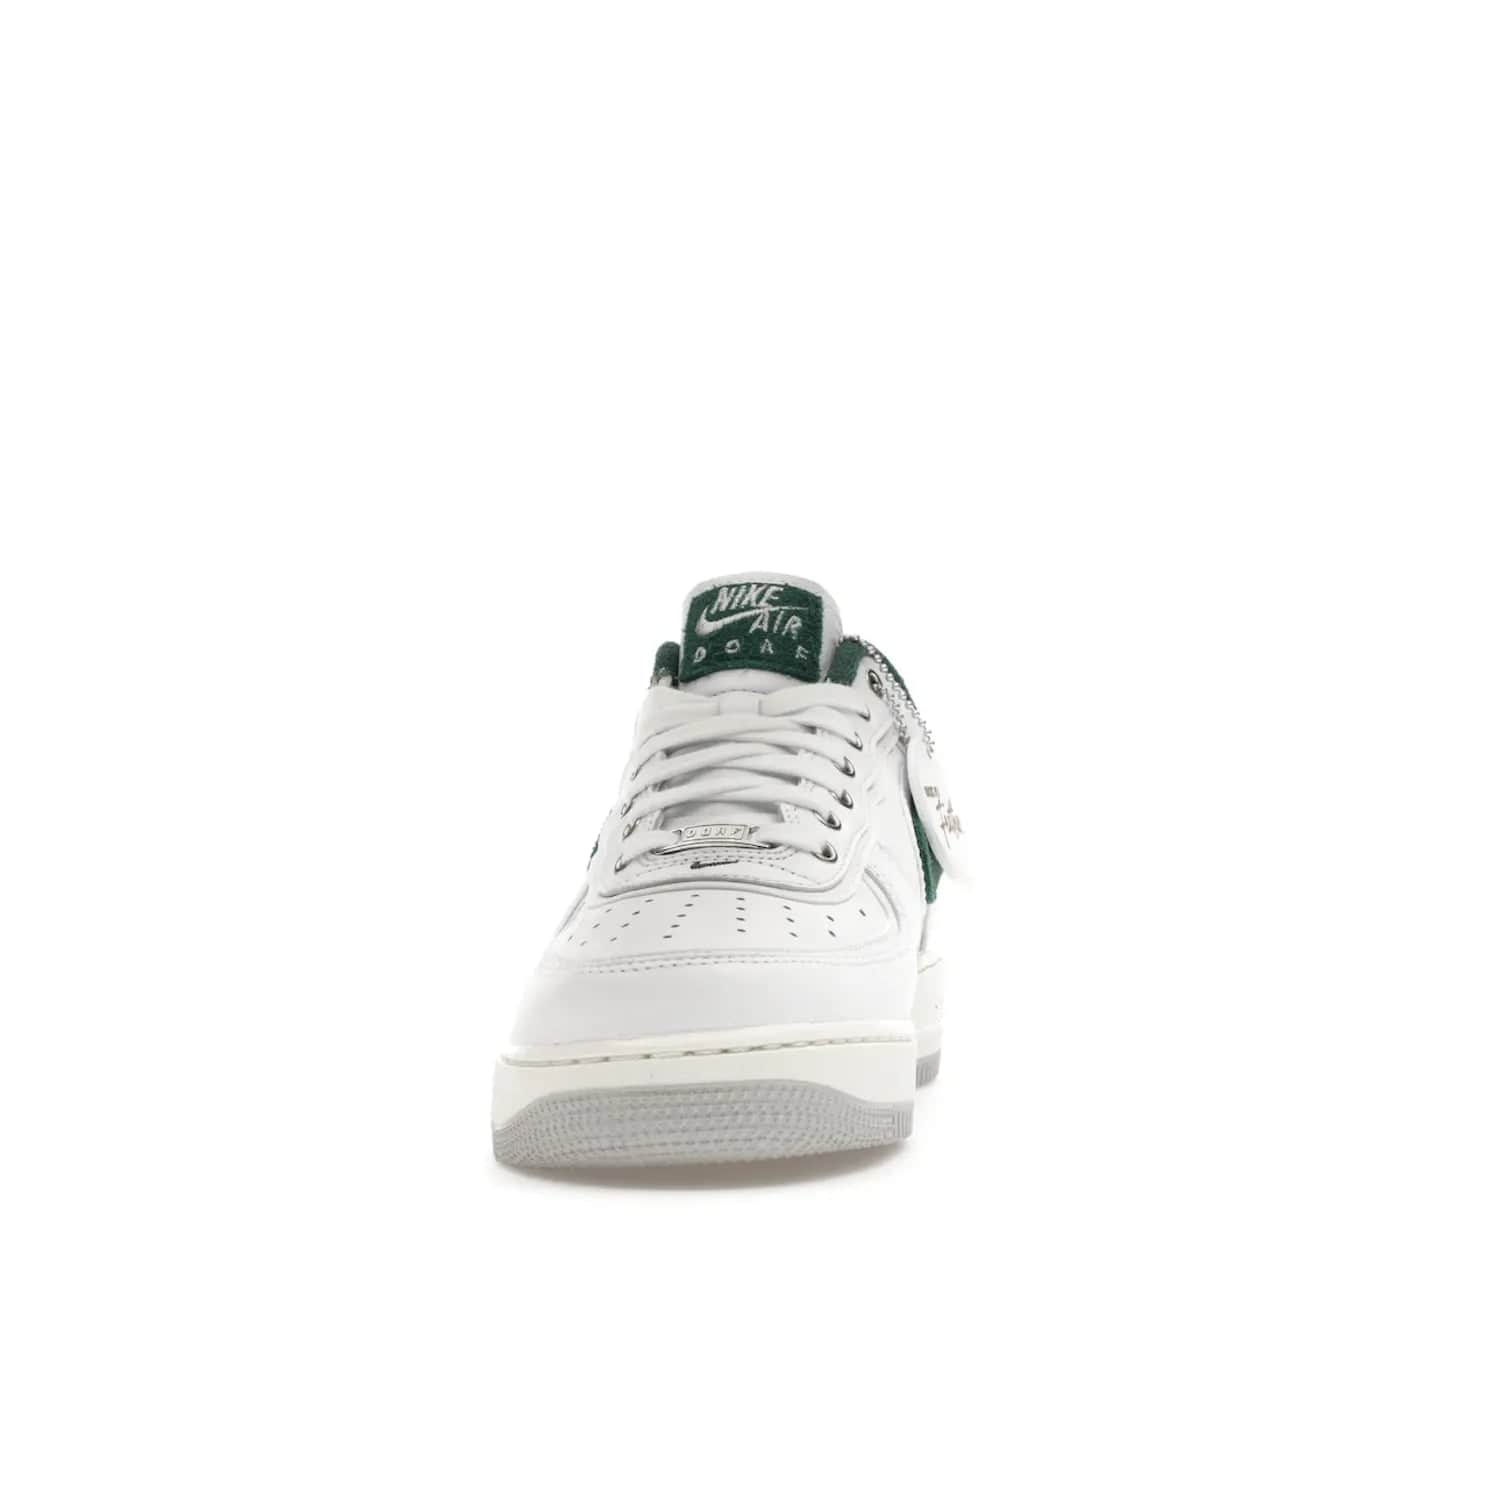 Nike Air Force 1 Low '07 Premium University of Oregon PE - Image 11 - Only at www.BallersClubKickz.com - The Nike Air Force 1 Low '07 Premium. Special Oregon University colorway. White base with green and sail accents. Cushioned rubber midsole. Comfort and style. Support your school!